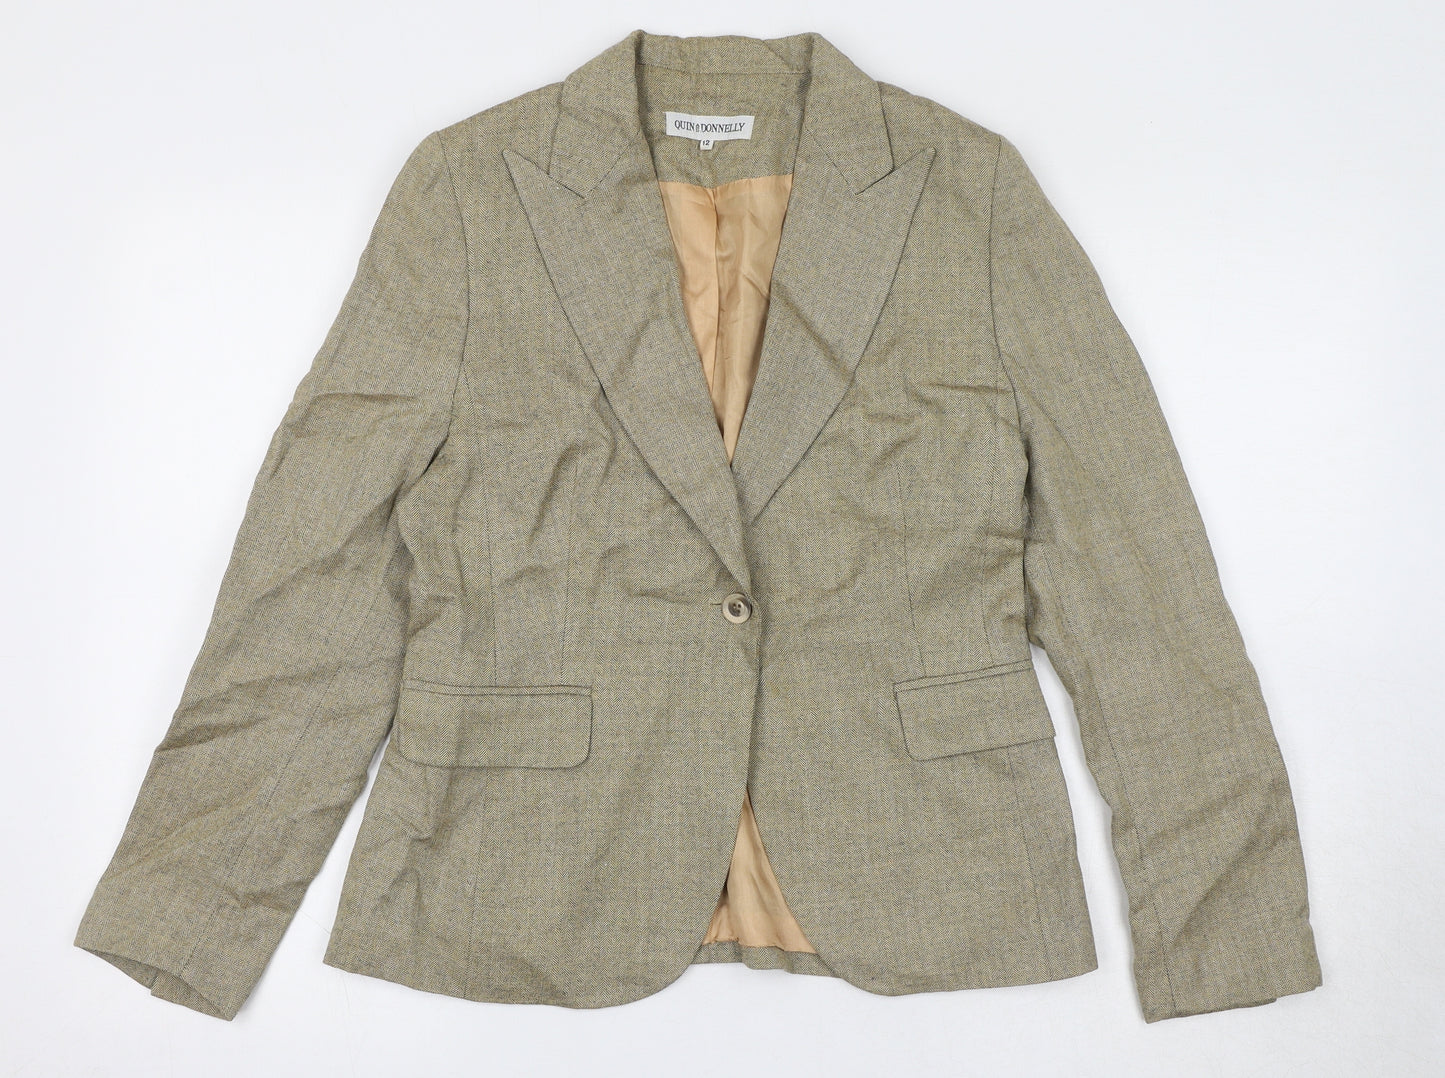 Quin And Donnelly Womens Beige Geometric Jacket Blazer Size 12 Button